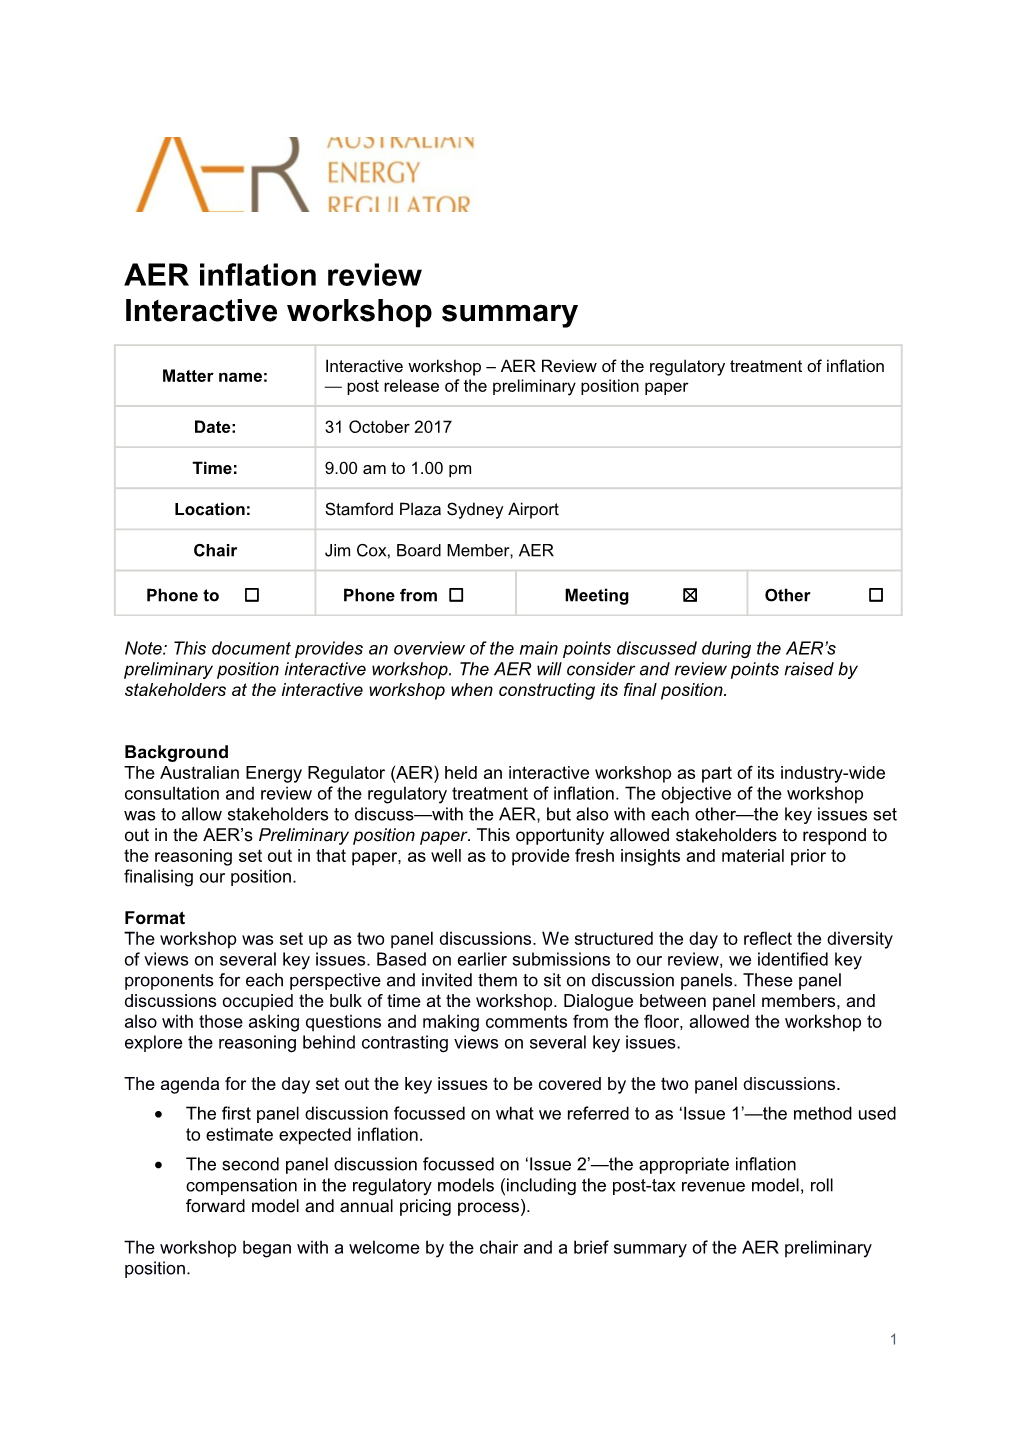 AER Inflation Review Interactive Workshopsummary